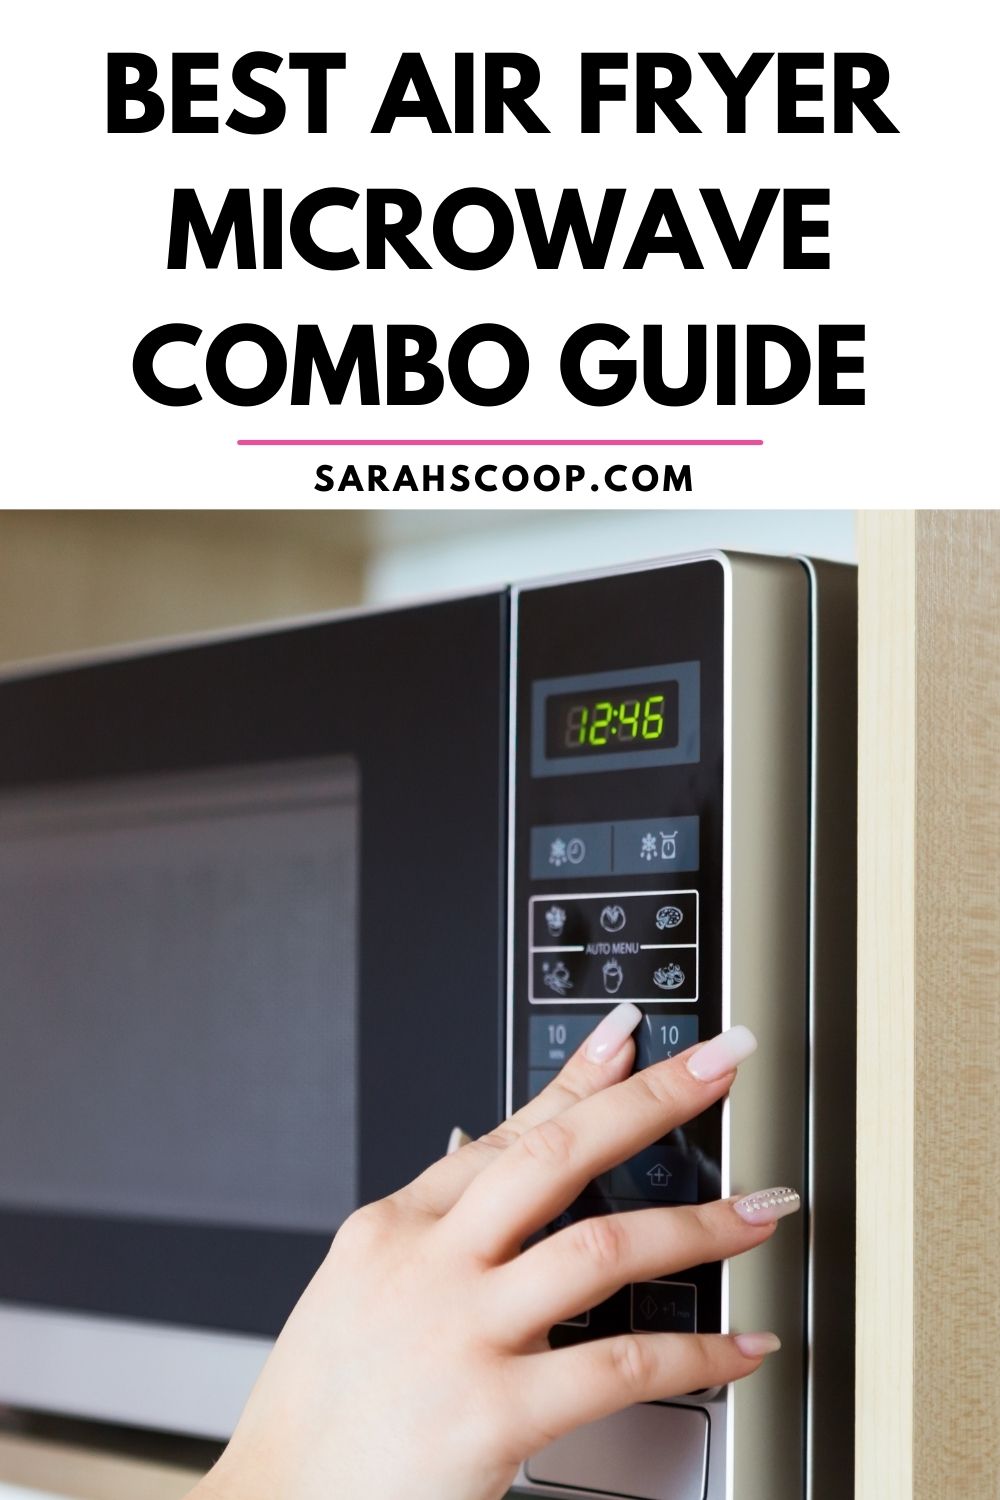 Best Air Fryer Microwave Combos For Your Kitchen